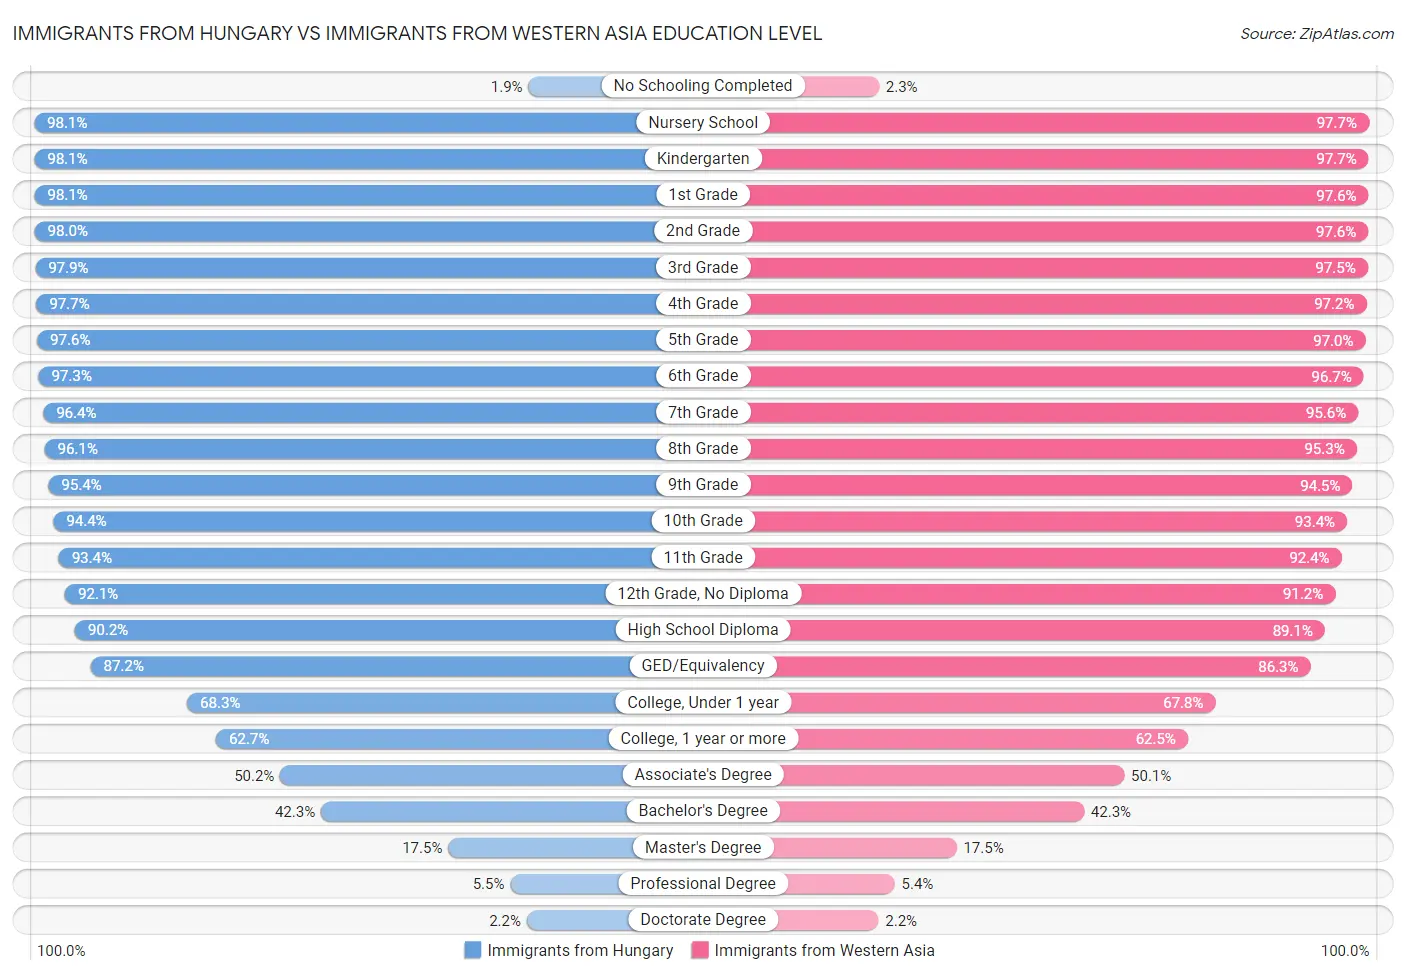 Immigrants from Hungary vs Immigrants from Western Asia Education Level